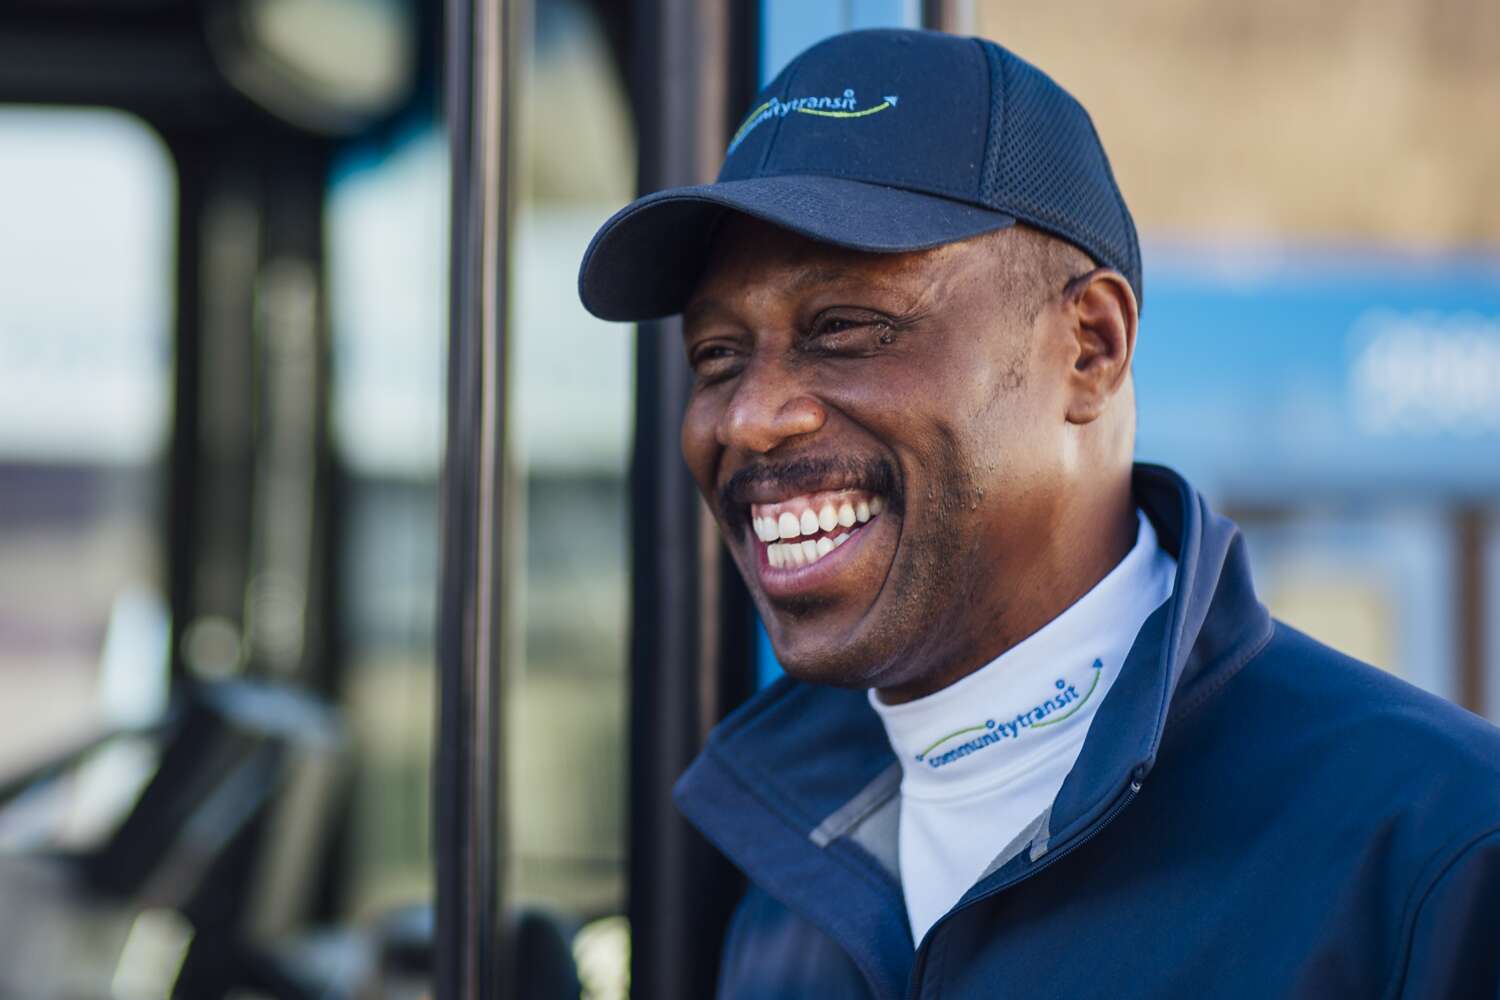 Bus Driver Robert Gaines is shown smiling in front of a CT bus.